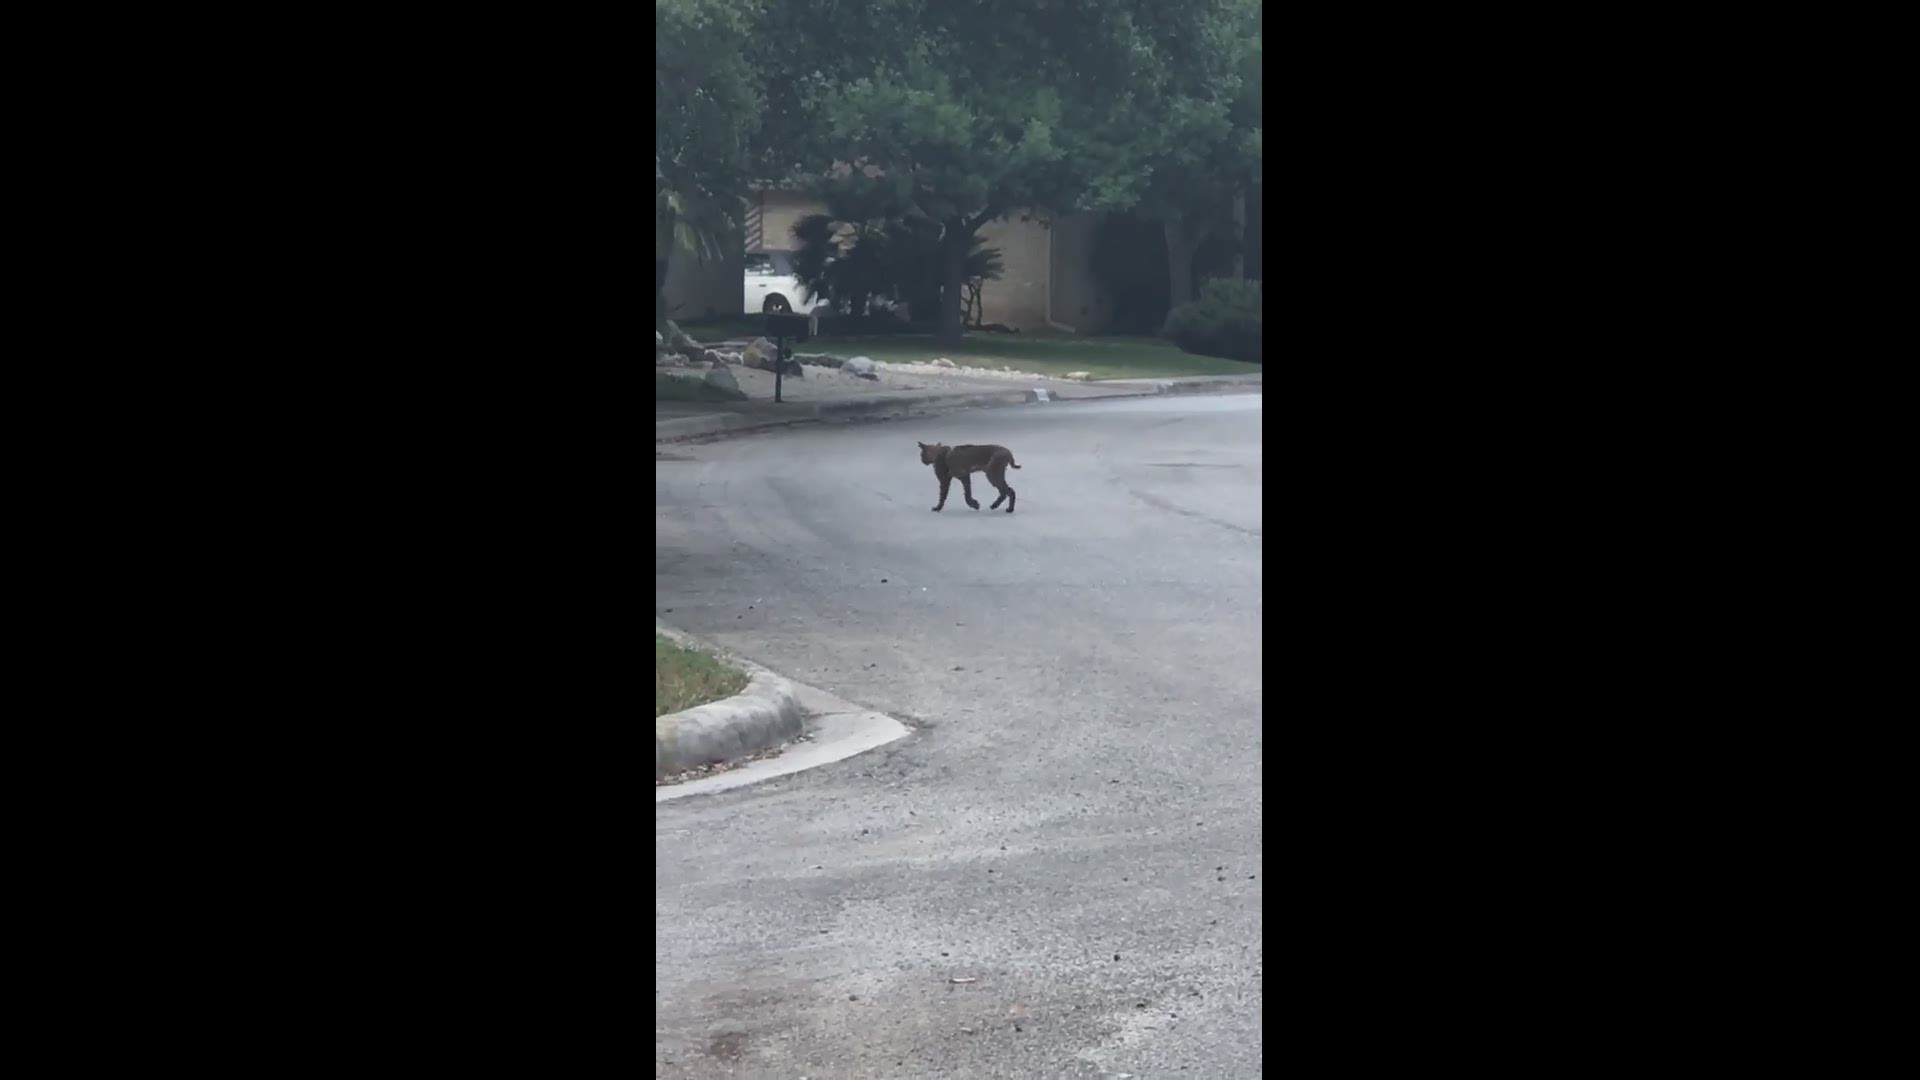 Check out this KENS 5 eyewitness video of a Bobcat roaming a northwest-side neighborhood.